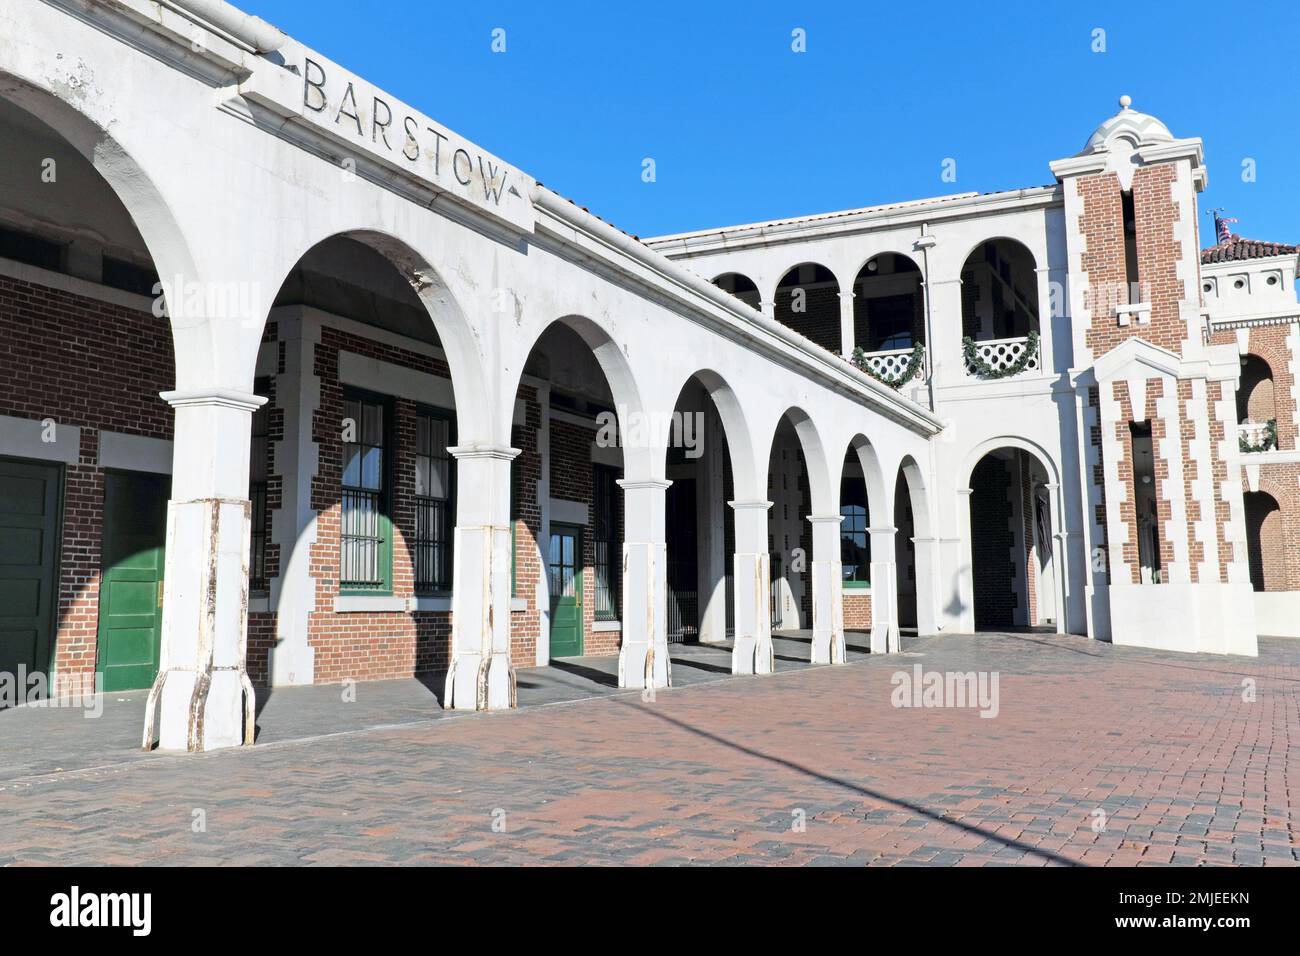 Opened in 1911, the Casa del Desierto was a Harvey House hotel and Santa Fe Railroad depot located in Barstow, California in the Mojave desert. Stock Photo